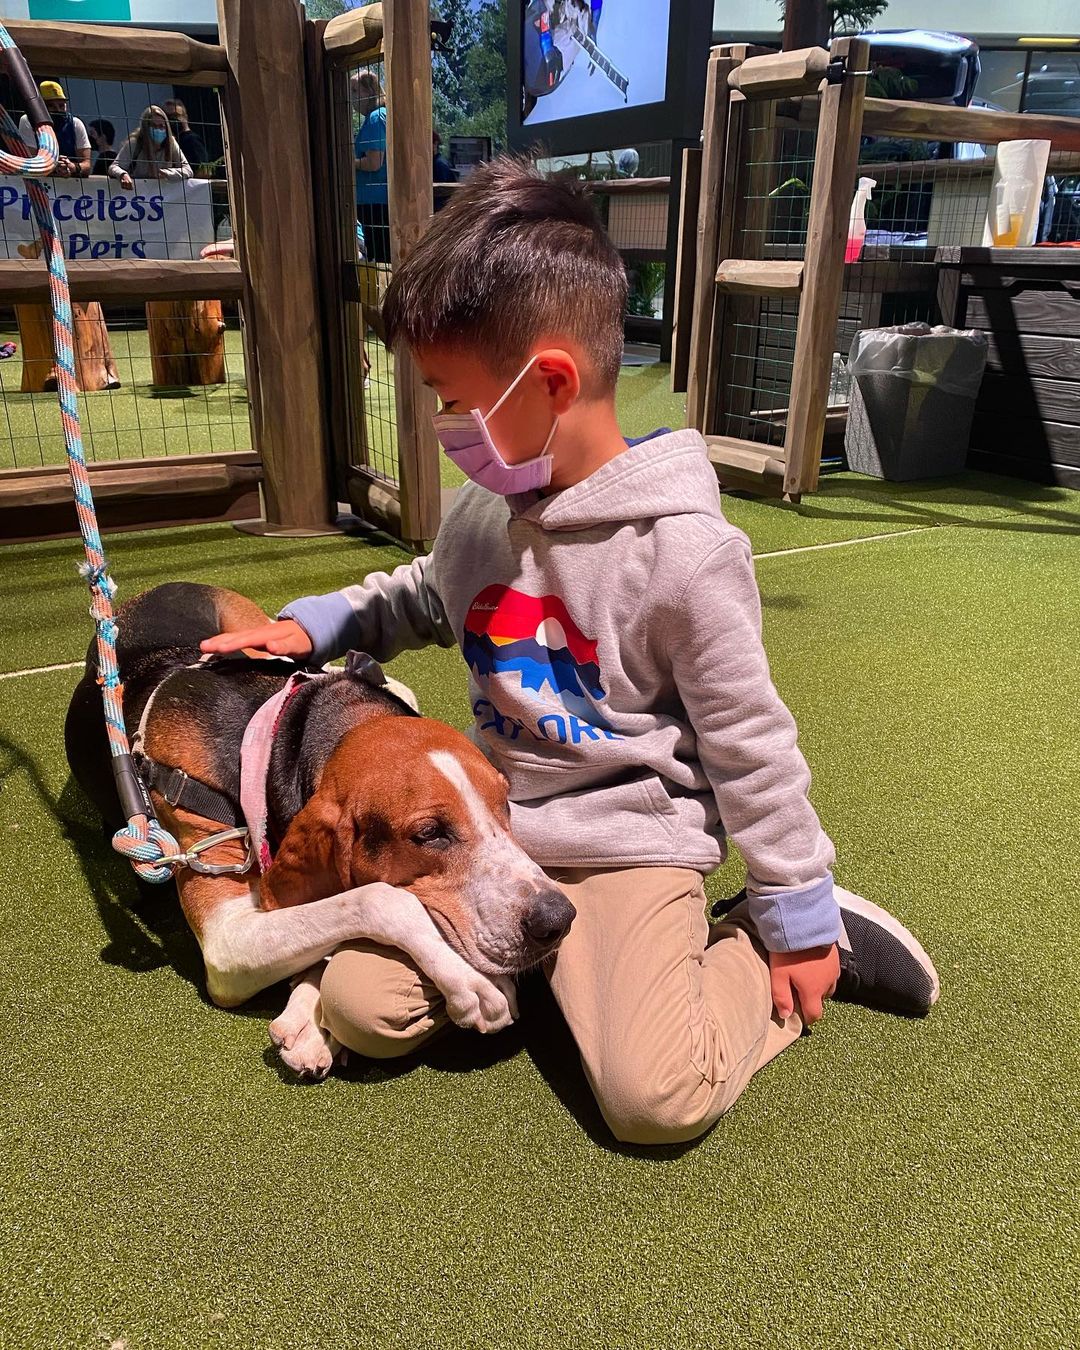 We have had so much fun at the LA AUTO show this week showcasing our adoptable dogs at the @subaru_usa booth! Subaru is an amazing company who truly loves animals. Check out Barrel the hound, who is clearly a hunk! He loves kids and can’t wait to find his forever home. We would say he loves kids, don’t you agree? 

____________________________________________________
<a target='_blank' href='https://www.instagram.com/explore/tags/pricelesspetrescue/'>#pricelesspetrescue</a> <a target='_blank' href='https://www.instagram.com/explore/tags/pricelesspets/'>#pricelesspets</a> <a target='_blank' href='https://www.instagram.com/explore/tags/adopt/'>#adopt</a> <a target='_blank' href='https://www.instagram.com/explore/tags/rescue/'>#rescue</a> <a target='_blank' href='https://www.instagram.com/explore/tags/costamesa/'>#costamesa</a> <a target='_blank' href='https://www.instagram.com/explore/tags/claremont/'>#claremont</a> <a target='_blank' href='https://www.instagram.com/explore/tags/chinohills/'>#chinohills</a> <a target='_blank' href='https://www.instagram.com/explore/tags/inlandempire/'>#inlandempire</a> <a target='_blank' href='https://www.instagram.com/explore/tags/orangecounty/'>#orangecounty</a> <a target='_blank' href='https://www.instagram.com/explore/tags/lacounty/'>#lacounty</a> <a target='_blank' href='https://www.instagram.com/explore/tags/dogsrock/'>#dogsrock</a> <a target='_blank' href='https://www.instagram.com/explore/tags/dogsinneed/'>#dogsinneed</a> <a target='_blank' href='https://www.instagram.com/explore/tags/adoptme/'>#adoptme</a> <a target='_blank' href='https://www.instagram.com/explore/tags/petsofinstagram/'>#petsofinstagram</a> <a target='_blank' href='https://www.instagram.com/explore/tags/dogsofinstagram/'>#dogsofinstagram</a> <a target='_blank' href='https://www.instagram.com/explore/tags/dogstagram/'>#dogstagram</a> <a target='_blank' href='https://www.instagram.com/explore/tags/catsofinstagram/'>#catsofinstagram</a> <a target='_blank' href='https://www.instagram.com/explore/tags/catsinneed/'>#catsinneed</a> <a target='_blank' href='https://www.instagram.com/explore/tags/catsrock/'>#catsrock</a> <a target='_blank' href='https://www.instagram.com/explore/tags/catstagram/'>#catstagram</a> <a target='_blank' href='https://www.instagram.com/explore/tags/rabbitstagram/'>#rabbitstagram</a> <a target='_blank' href='https://www.instagram.com/explore/tags/rabbitsofinstagram/'>#rabbitsofinstagram</a> <a target='_blank' href='https://www.instagram.com/explore/tags/rabbitsofig/'>#rabbitsofig</a> <a target='_blank' href='https://www.instagram.com/explore/tags/rescuebunnies/'>#rescuebunnies</a> <a target='_blank' href='https://www.instagram.com/explore/tags/savingbunbybun/'>#savingbunbybun</a> <a target='_blank' href='https://www.instagram.com/explore/tags/savingonebyone/'>#savingonebyone</a> <a target='_blank' href='https://www.instagram.com/explore/tags/untiltherearenone/'>#untiltherearenone</a> <a target='_blank' href='https://www.instagram.com/explore/tags/petrescue/'>#petrescue</a> <a target='_blank' href='https://www.instagram.com/explore/tags/nokillshelter/'>#nokillshelter</a> <a target='_blank' href='https://www.instagram.com/explore/tags/nonprofit/'>#nonprofit</a>